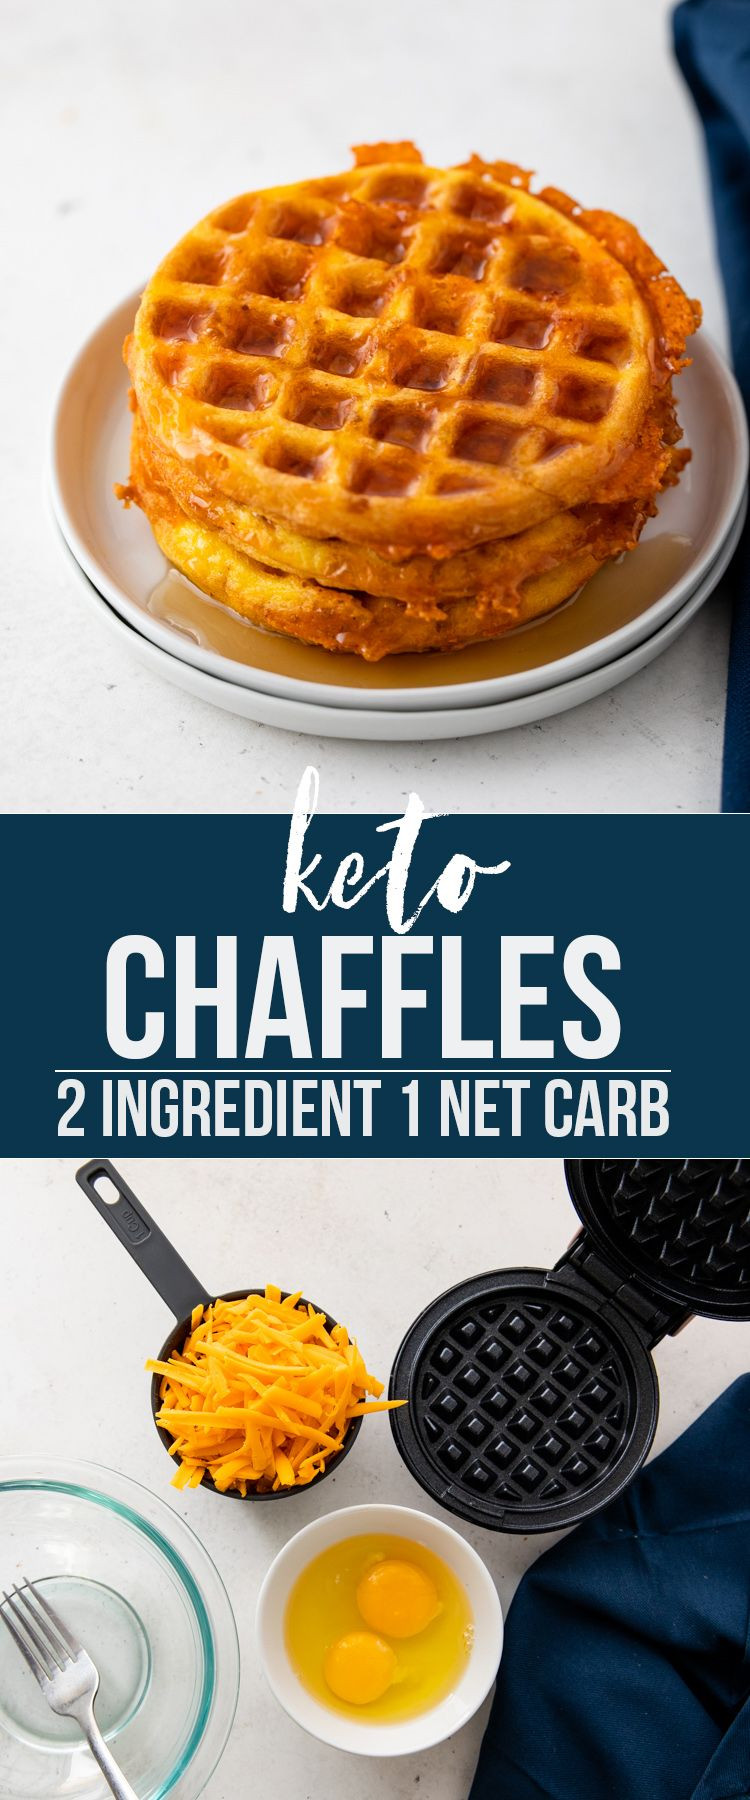 2 Ingredient Keto Dessert
 2 Ingre nt Chaffles only 1 net carb each in 2020